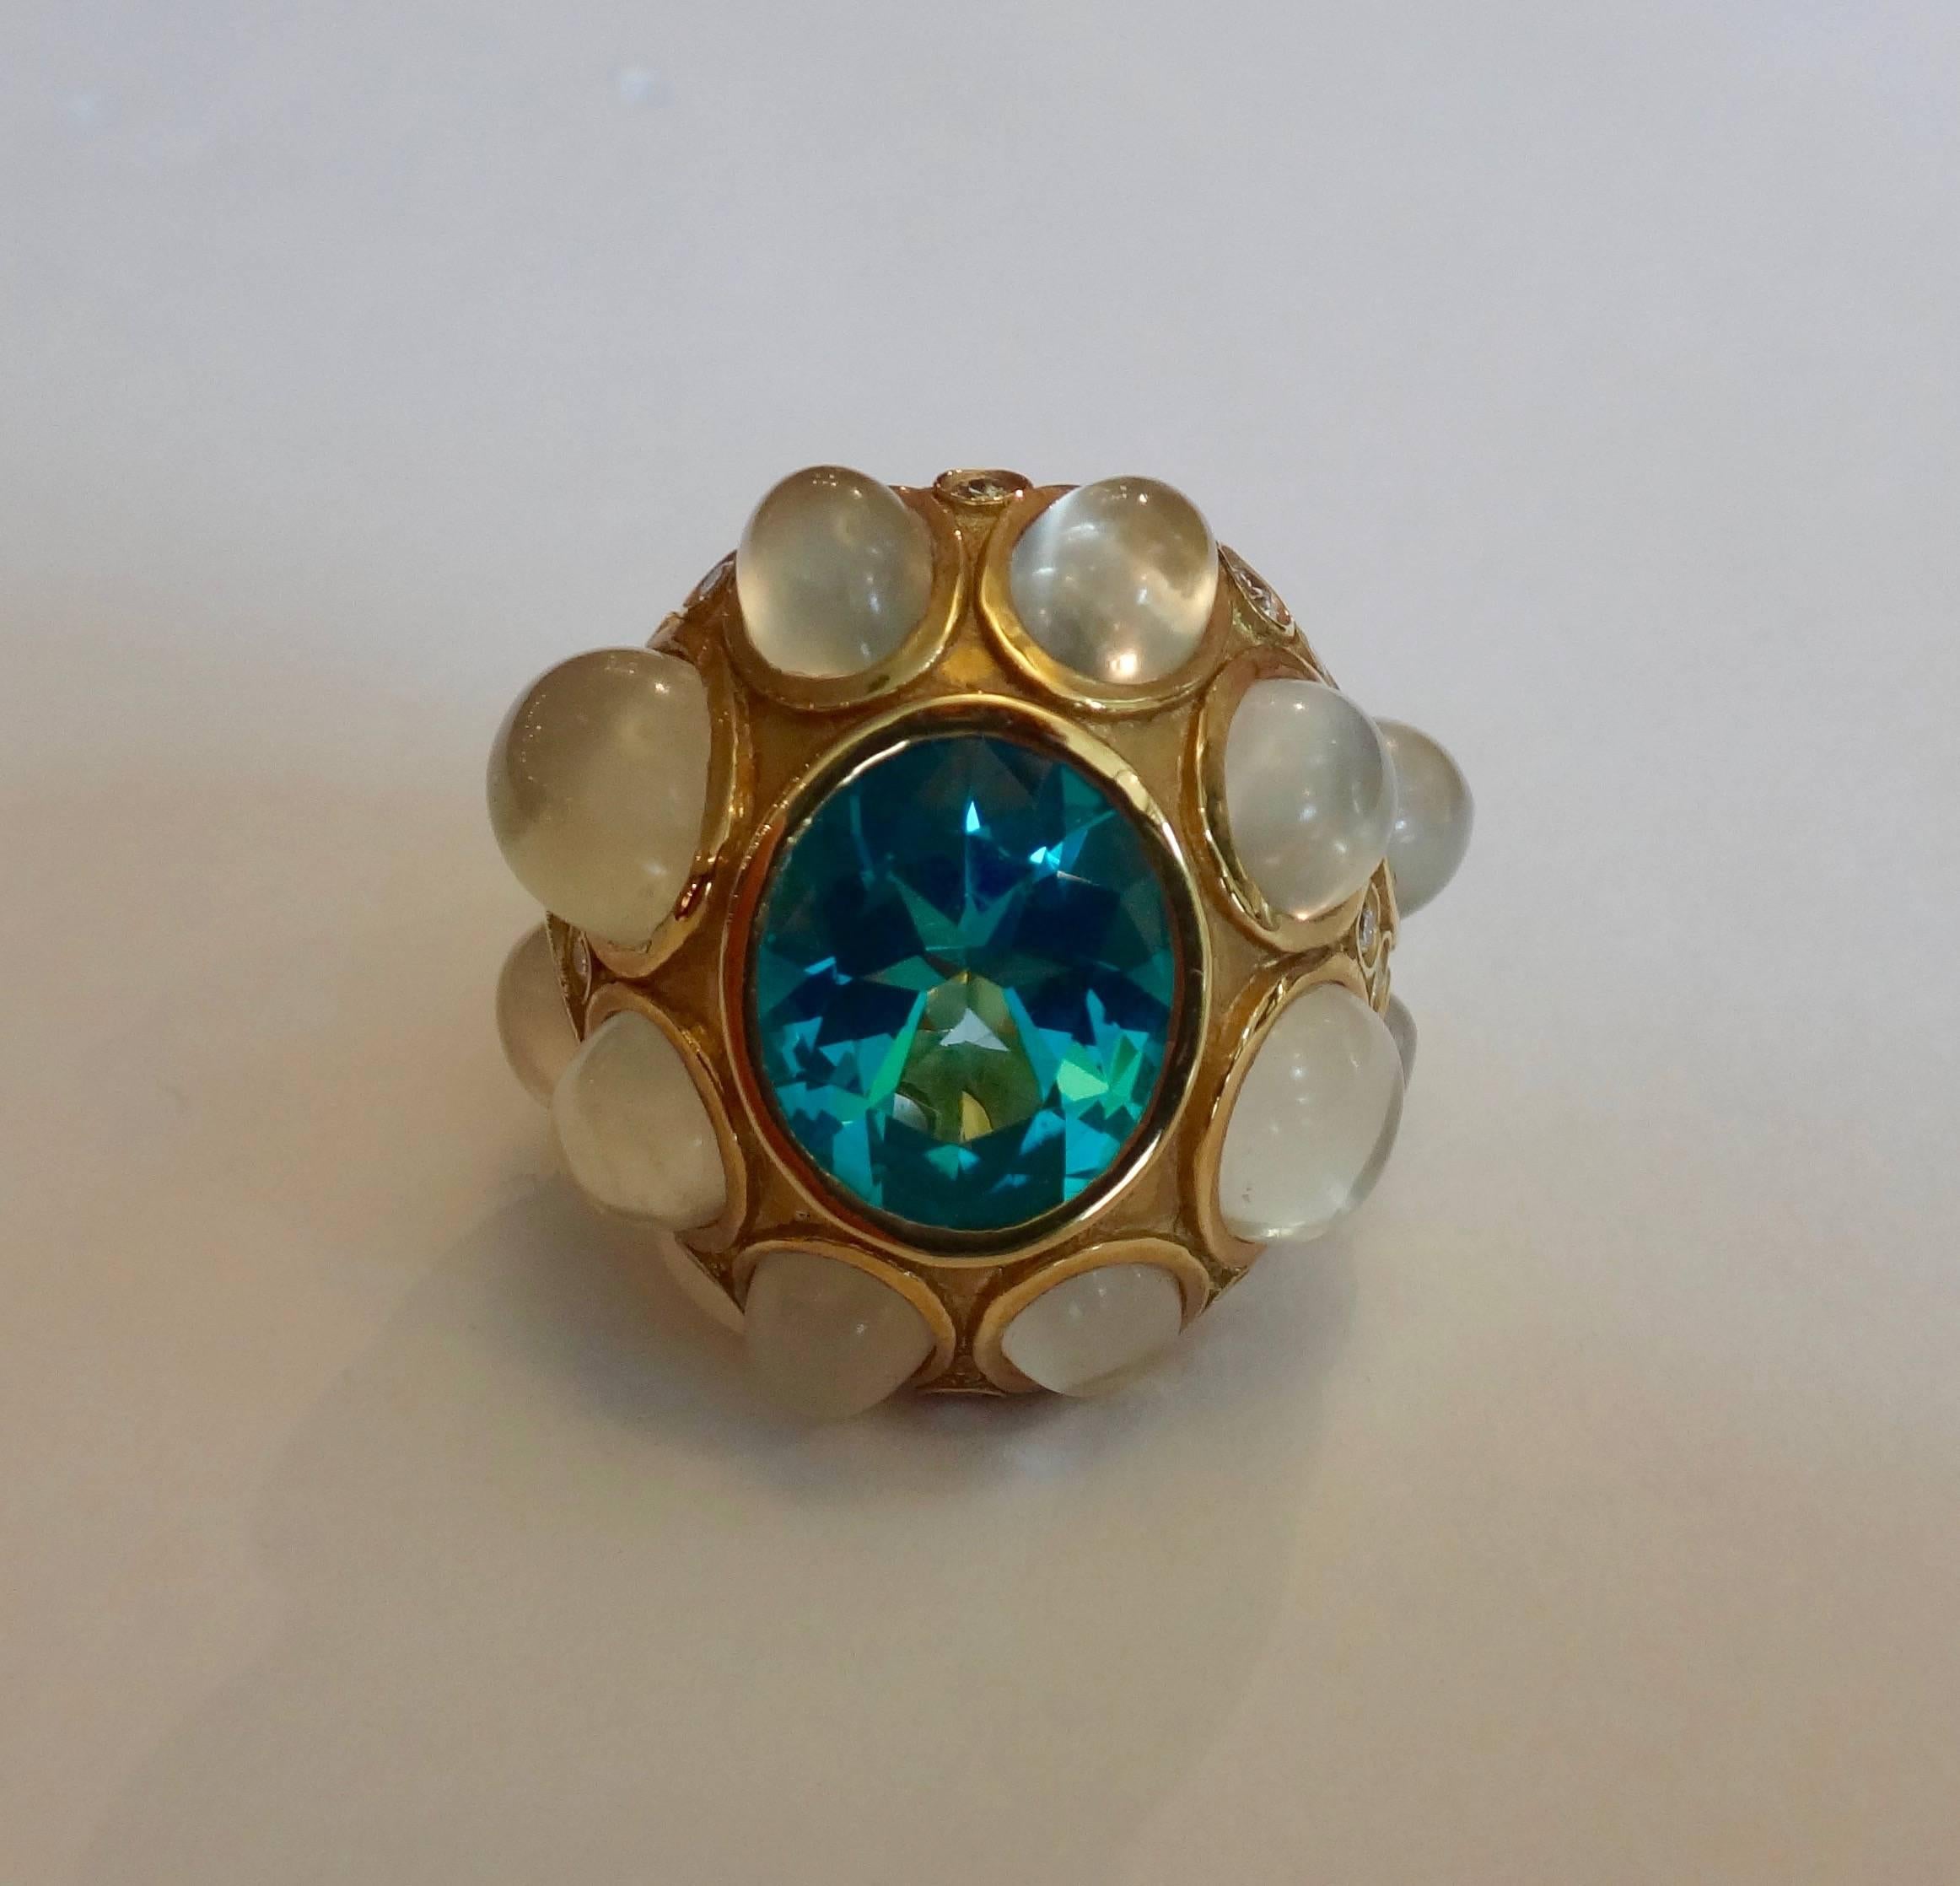 Bright blue topaz (5.79 carats) is paired with a rare collection of white cat's eye moonstones of various sizes (12 at 13.74 carats) and bezel set diamonds (14 at .42 carats).  All set in a textured 18k yellow gold dome ring containing beautiful